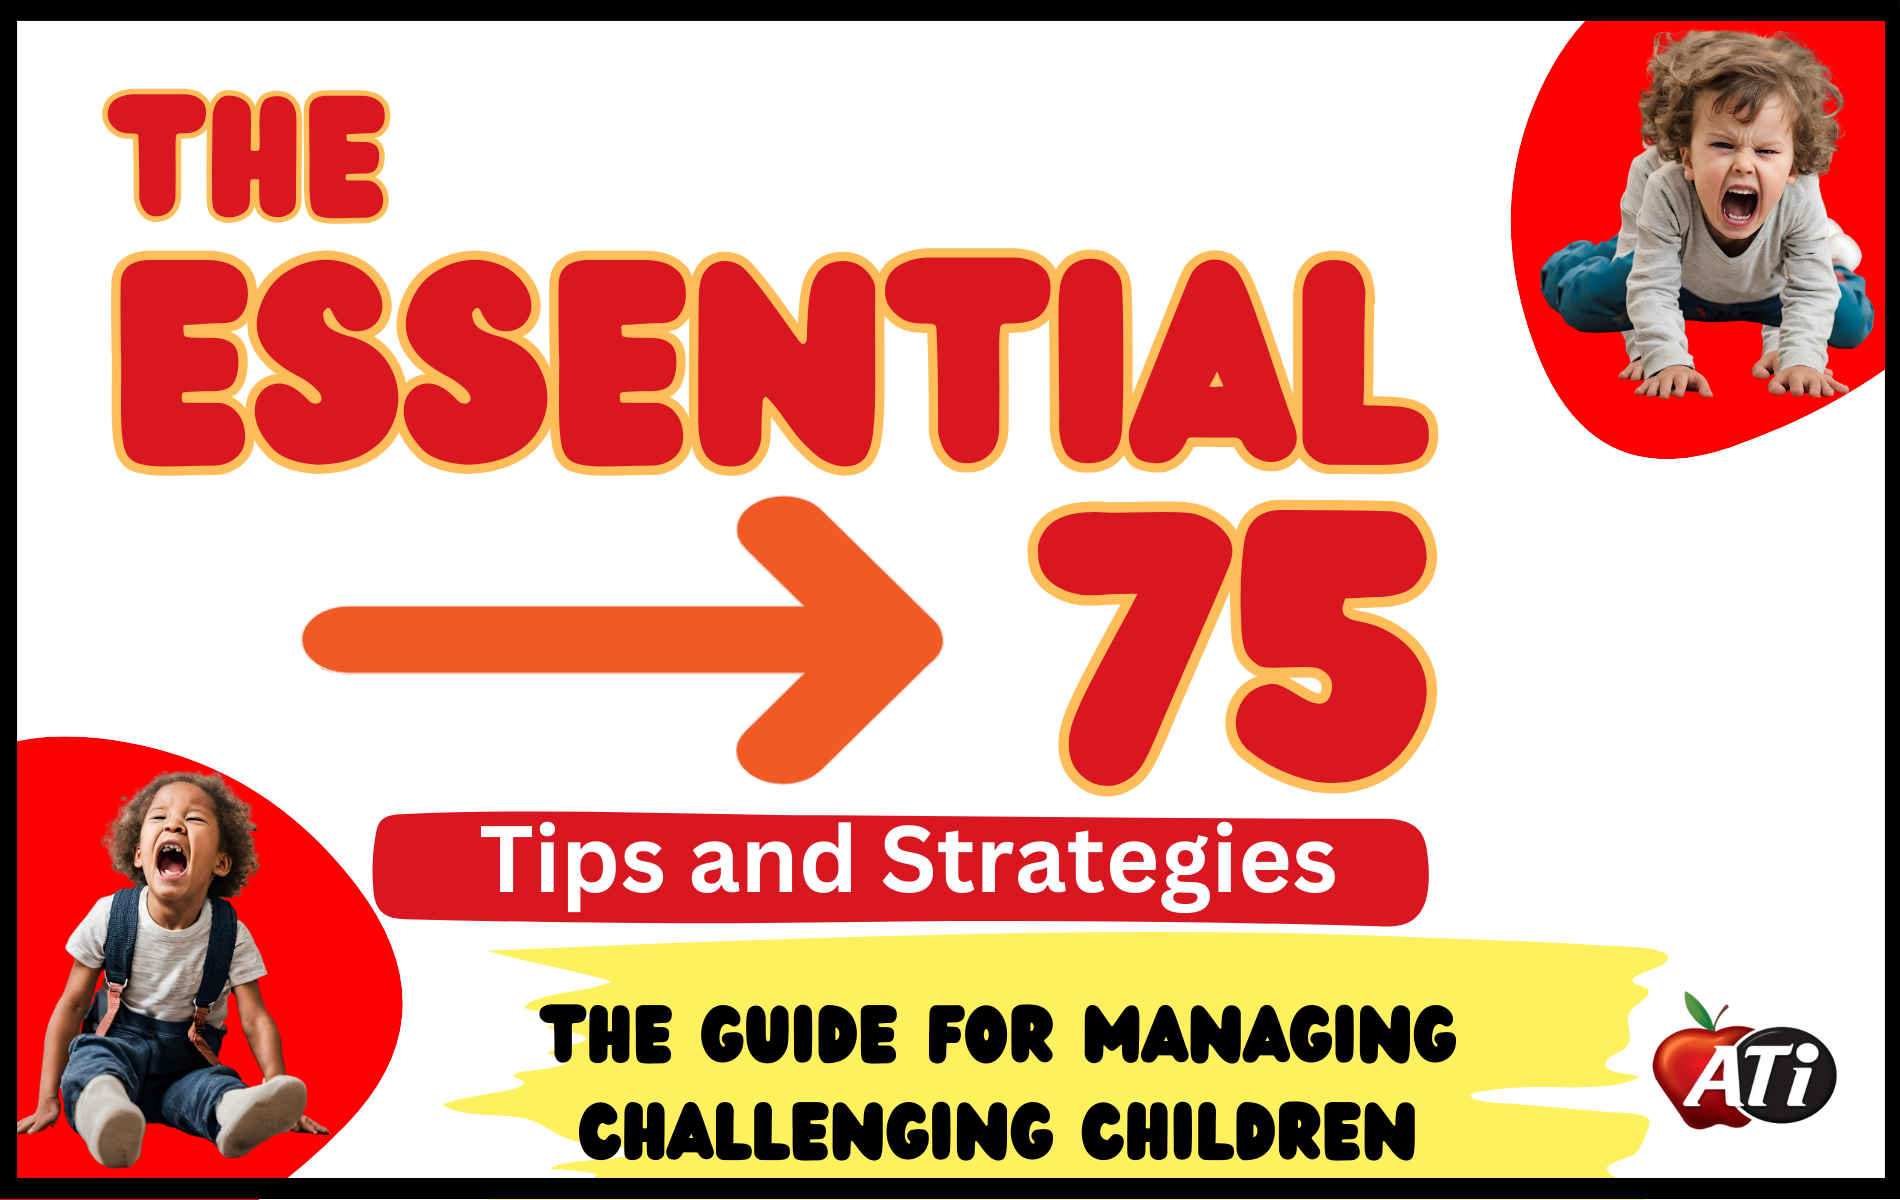 Image for The Essential 75 Tips and Strategies